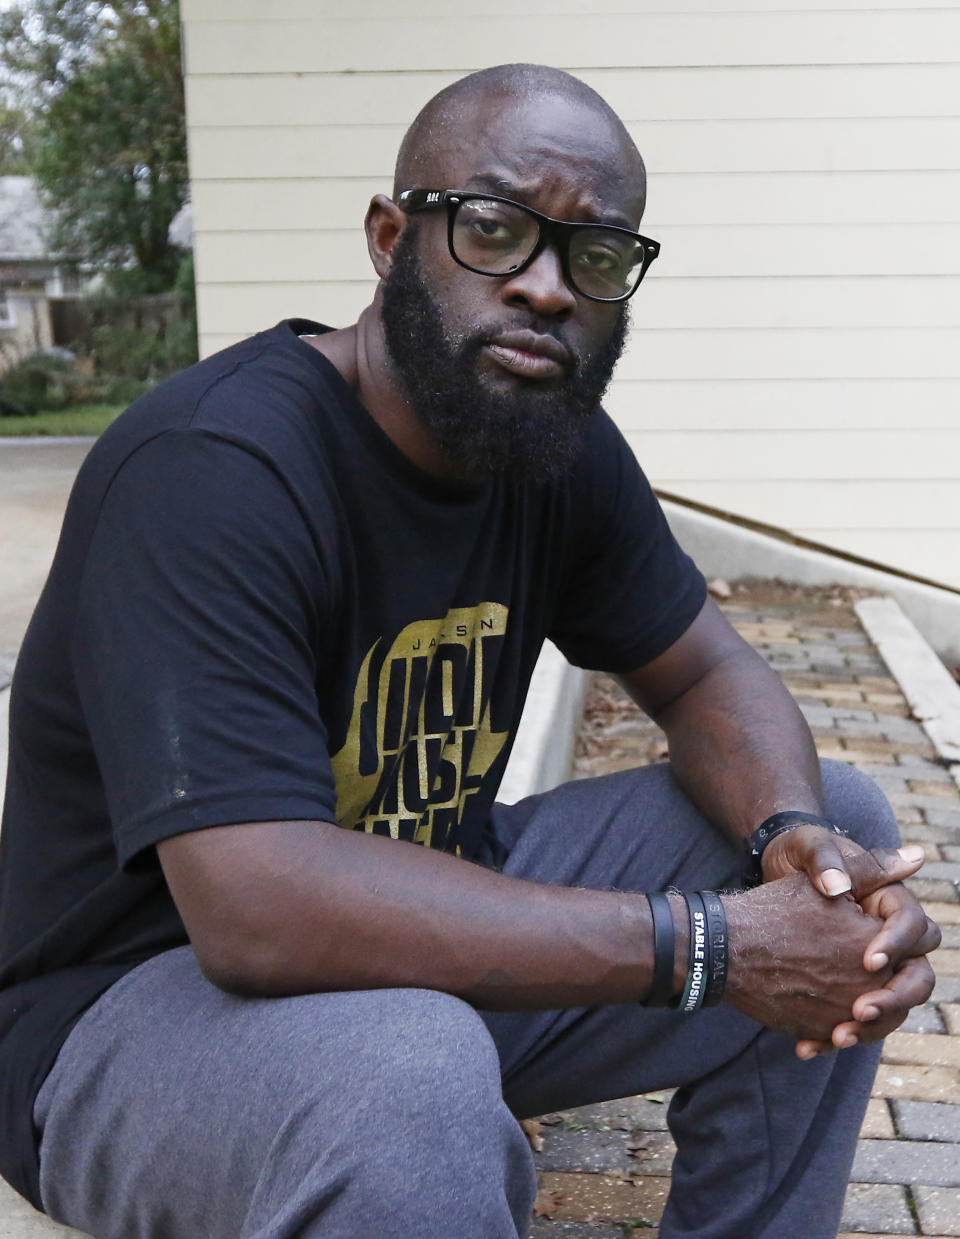 Brad Franklin, of Jackson, Miss., an African-American entrepreneur and rapper who recorded under the name Kamikaze, sits in the Fondren Park amphitheater and says he usually supports Democrats and will vote for Democratic gubernatorial nominee, current Attorney General Jim Hood, Wednesday, Oct. 30, 2019. However, Franklin also says he's put off by Hood using one type of message for black audiences and another for "rural Mississippians." (AP Photo/Rogelio V. Solis)